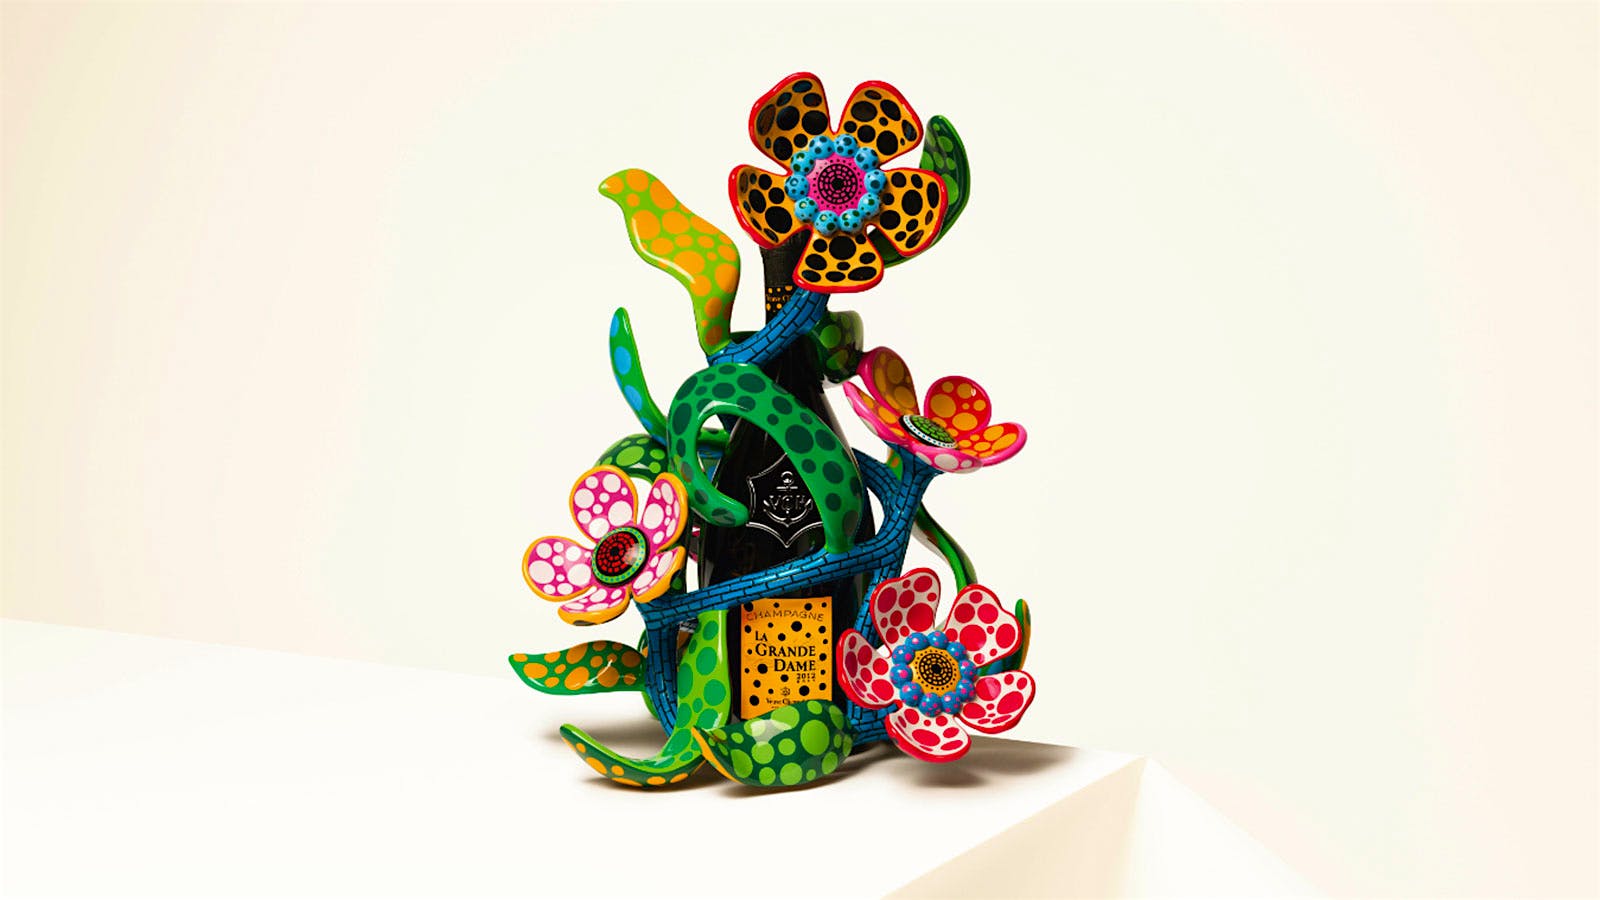 Veuve Clicquot's New 2012s Grow Wild with Trippy Art Garb